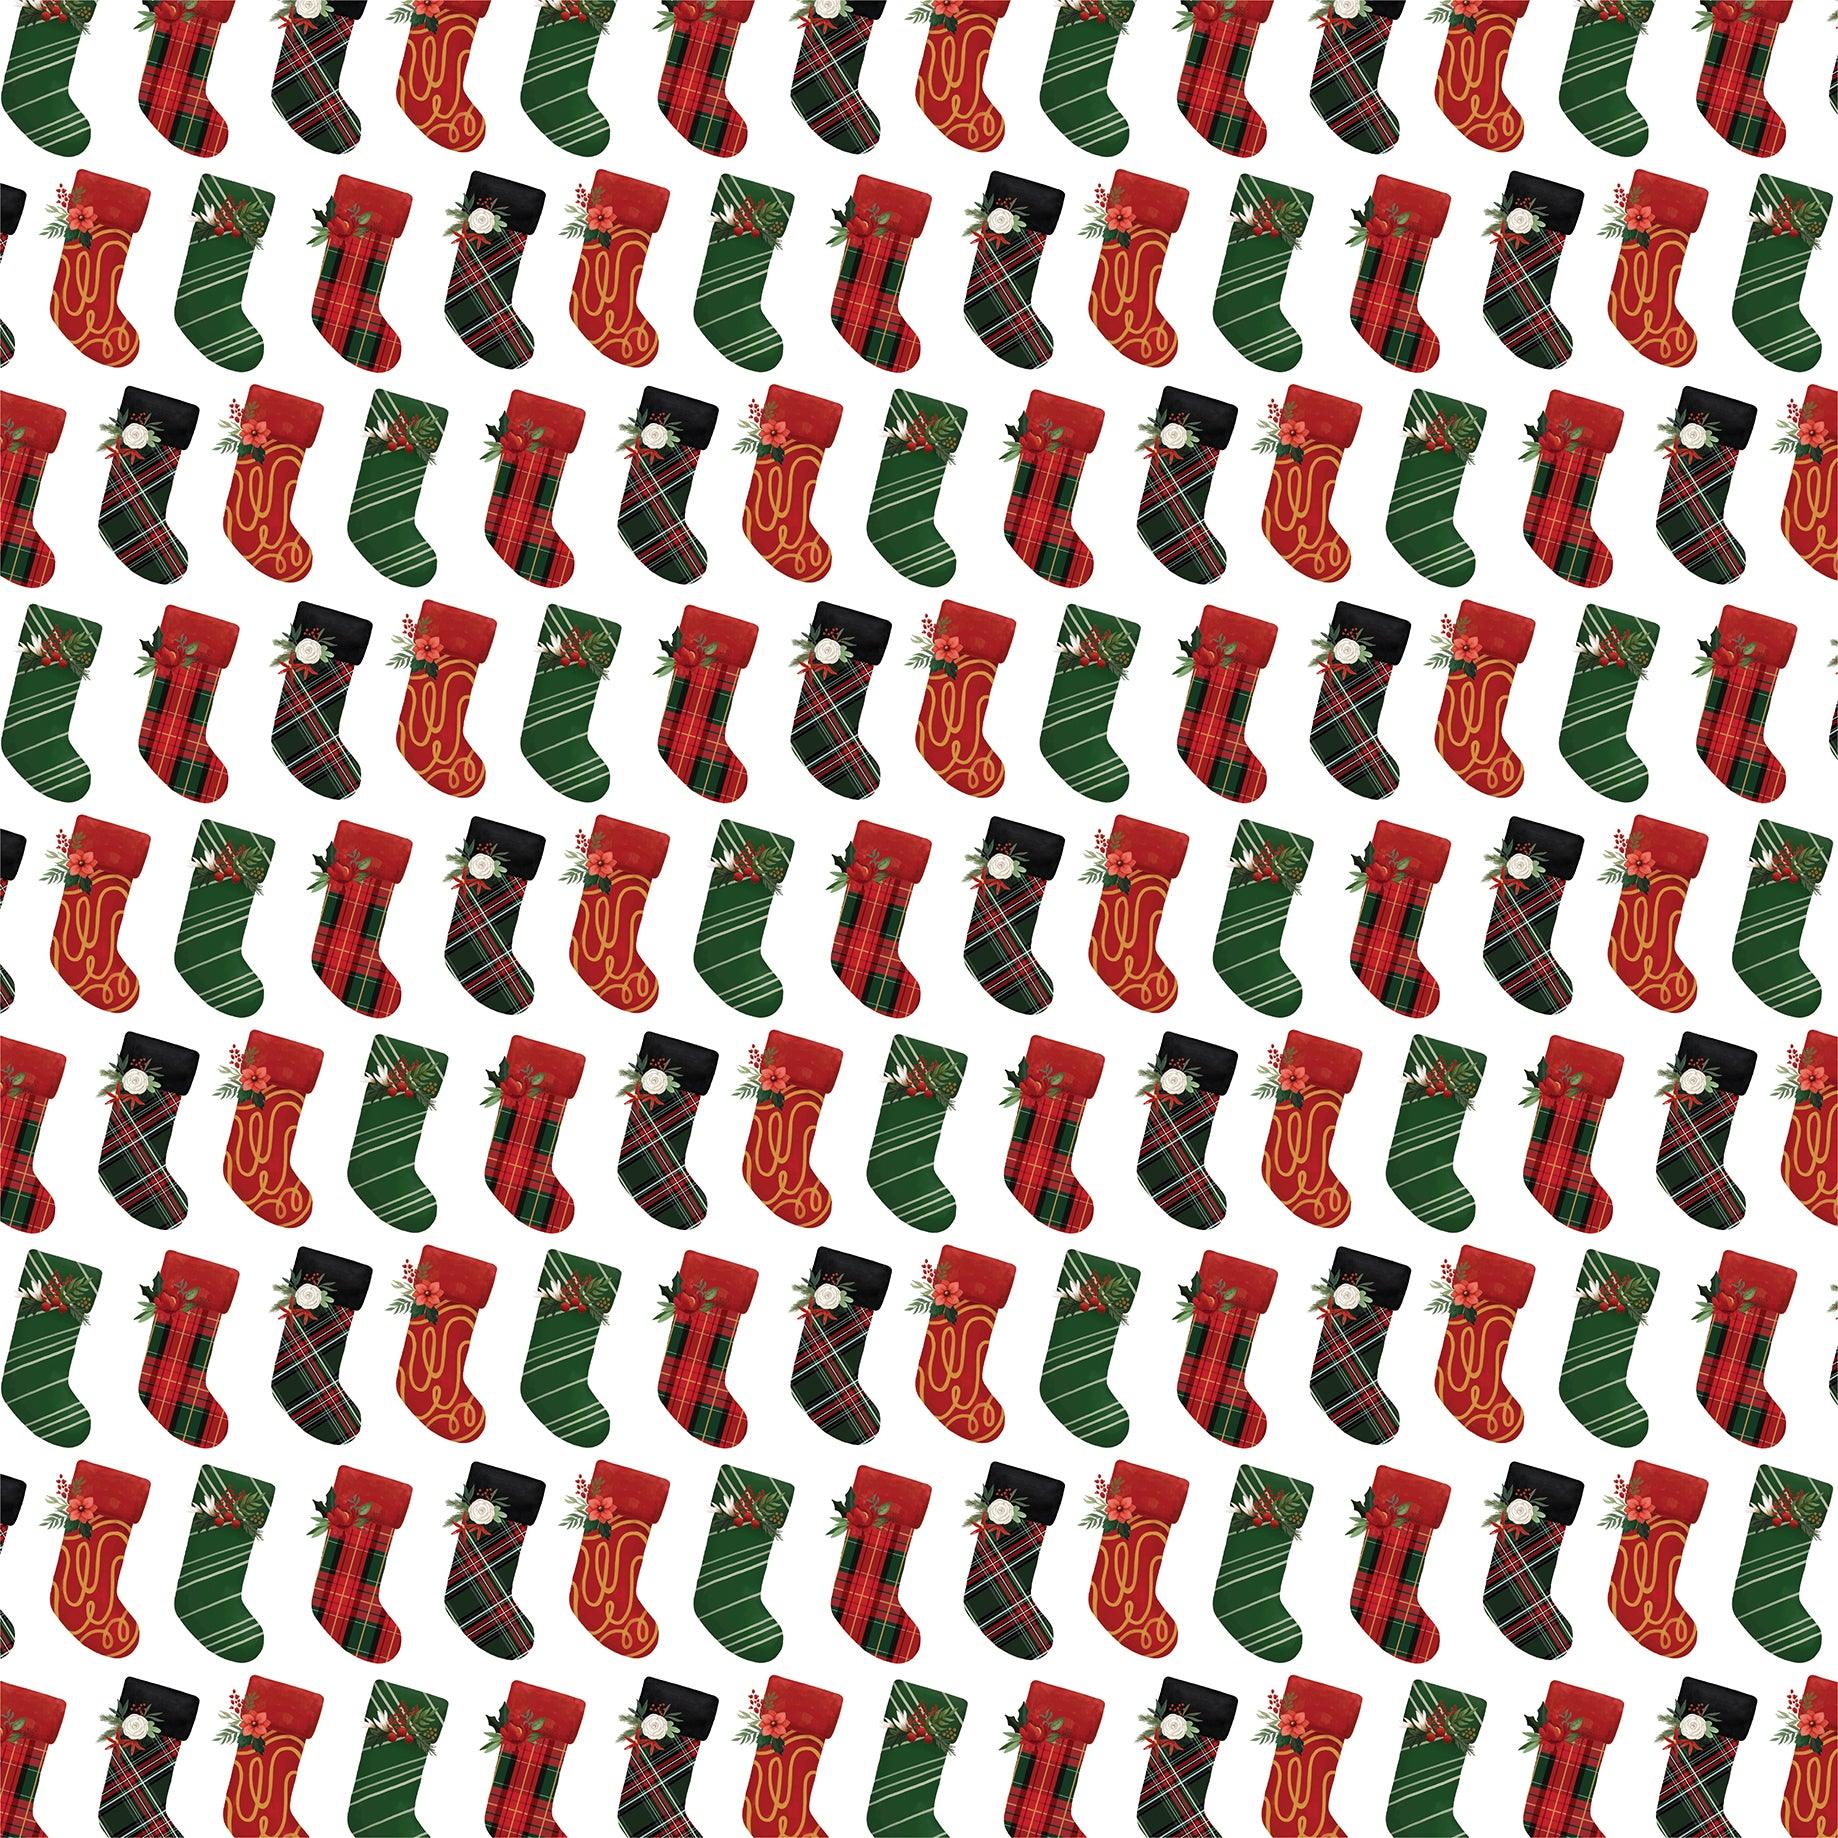 A Wonderful Christmas Collection Stockings Were Hung 12 x 12 Double-Sided Scrapbook Paper by Carta Bella - Scrapbook Supply Companies